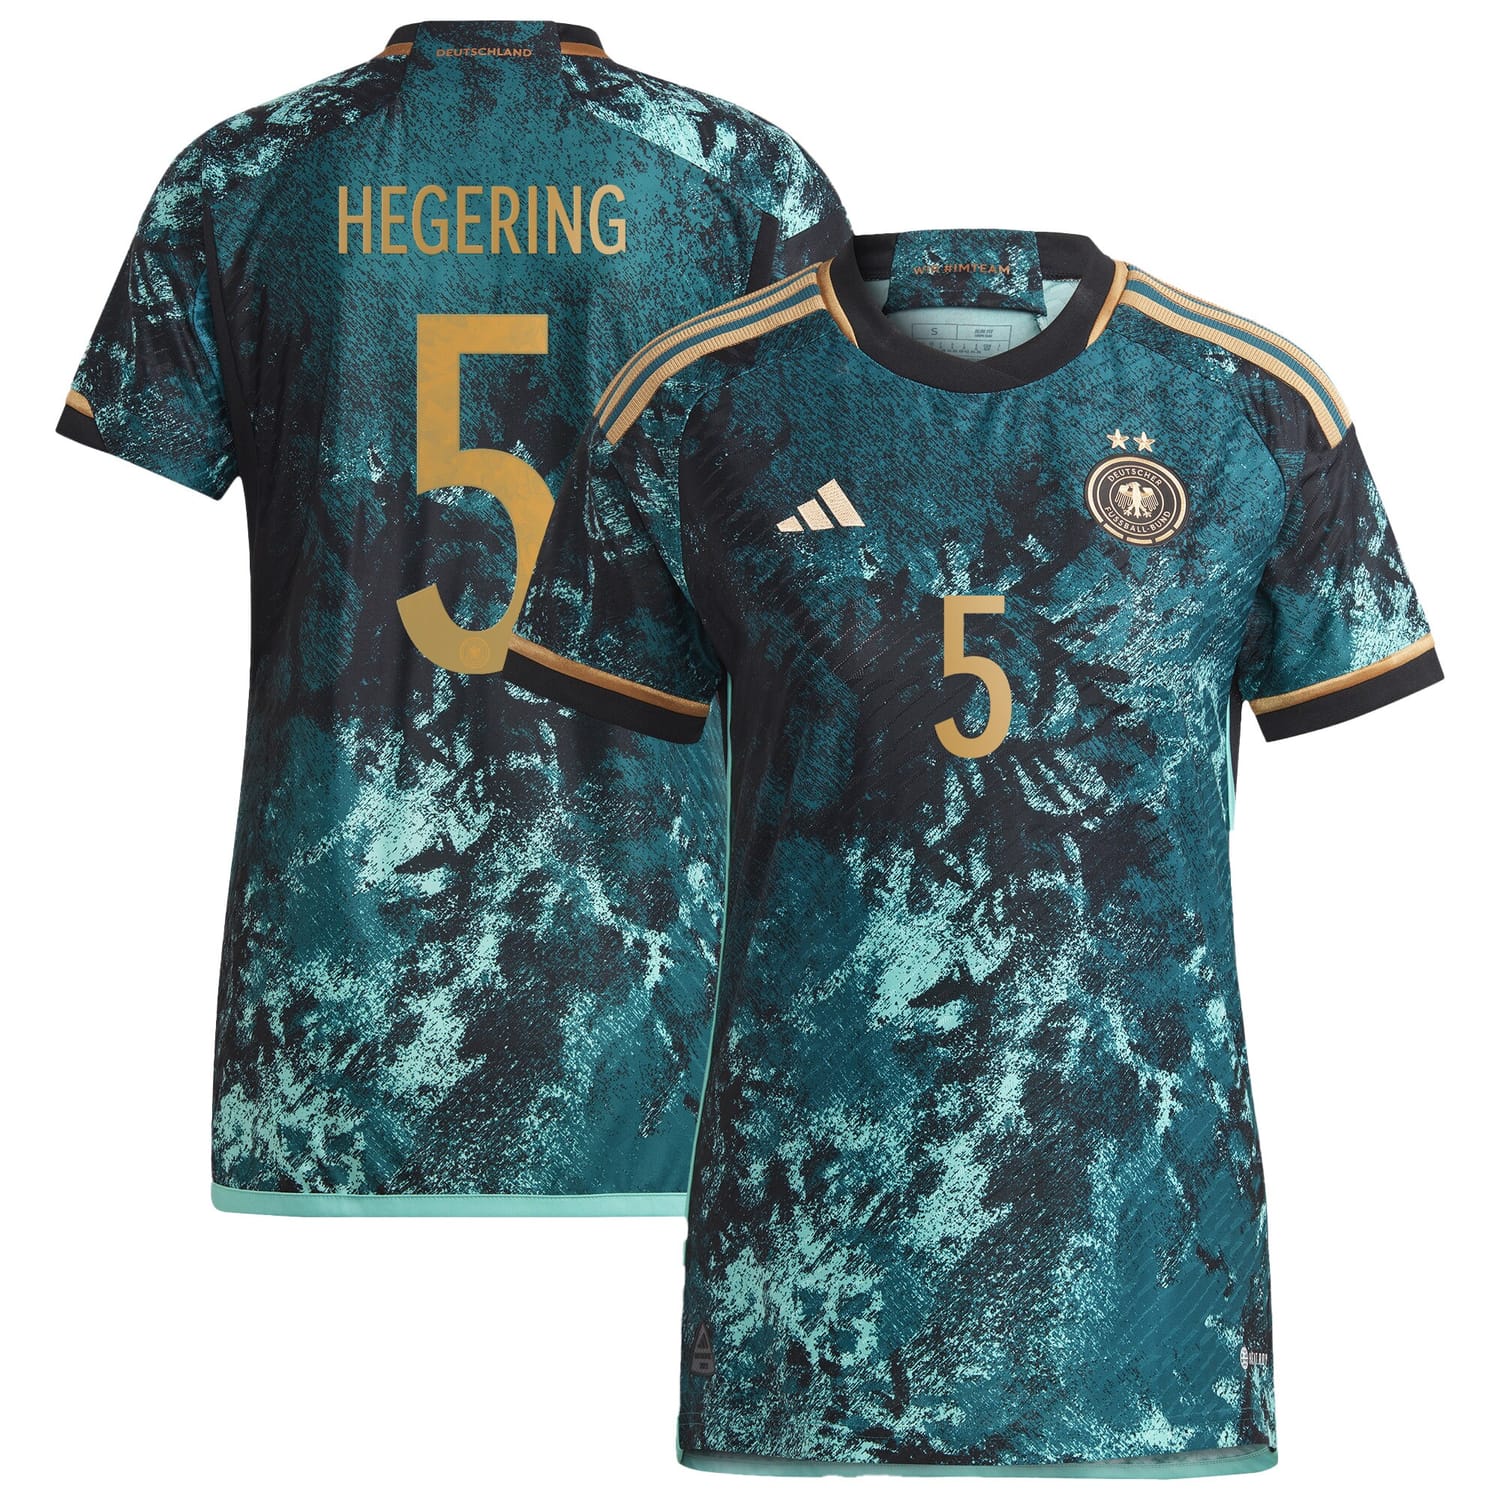 Germany National Team Away Authentic Jersey Shirt 2023 player Hegering 5 printing for Women